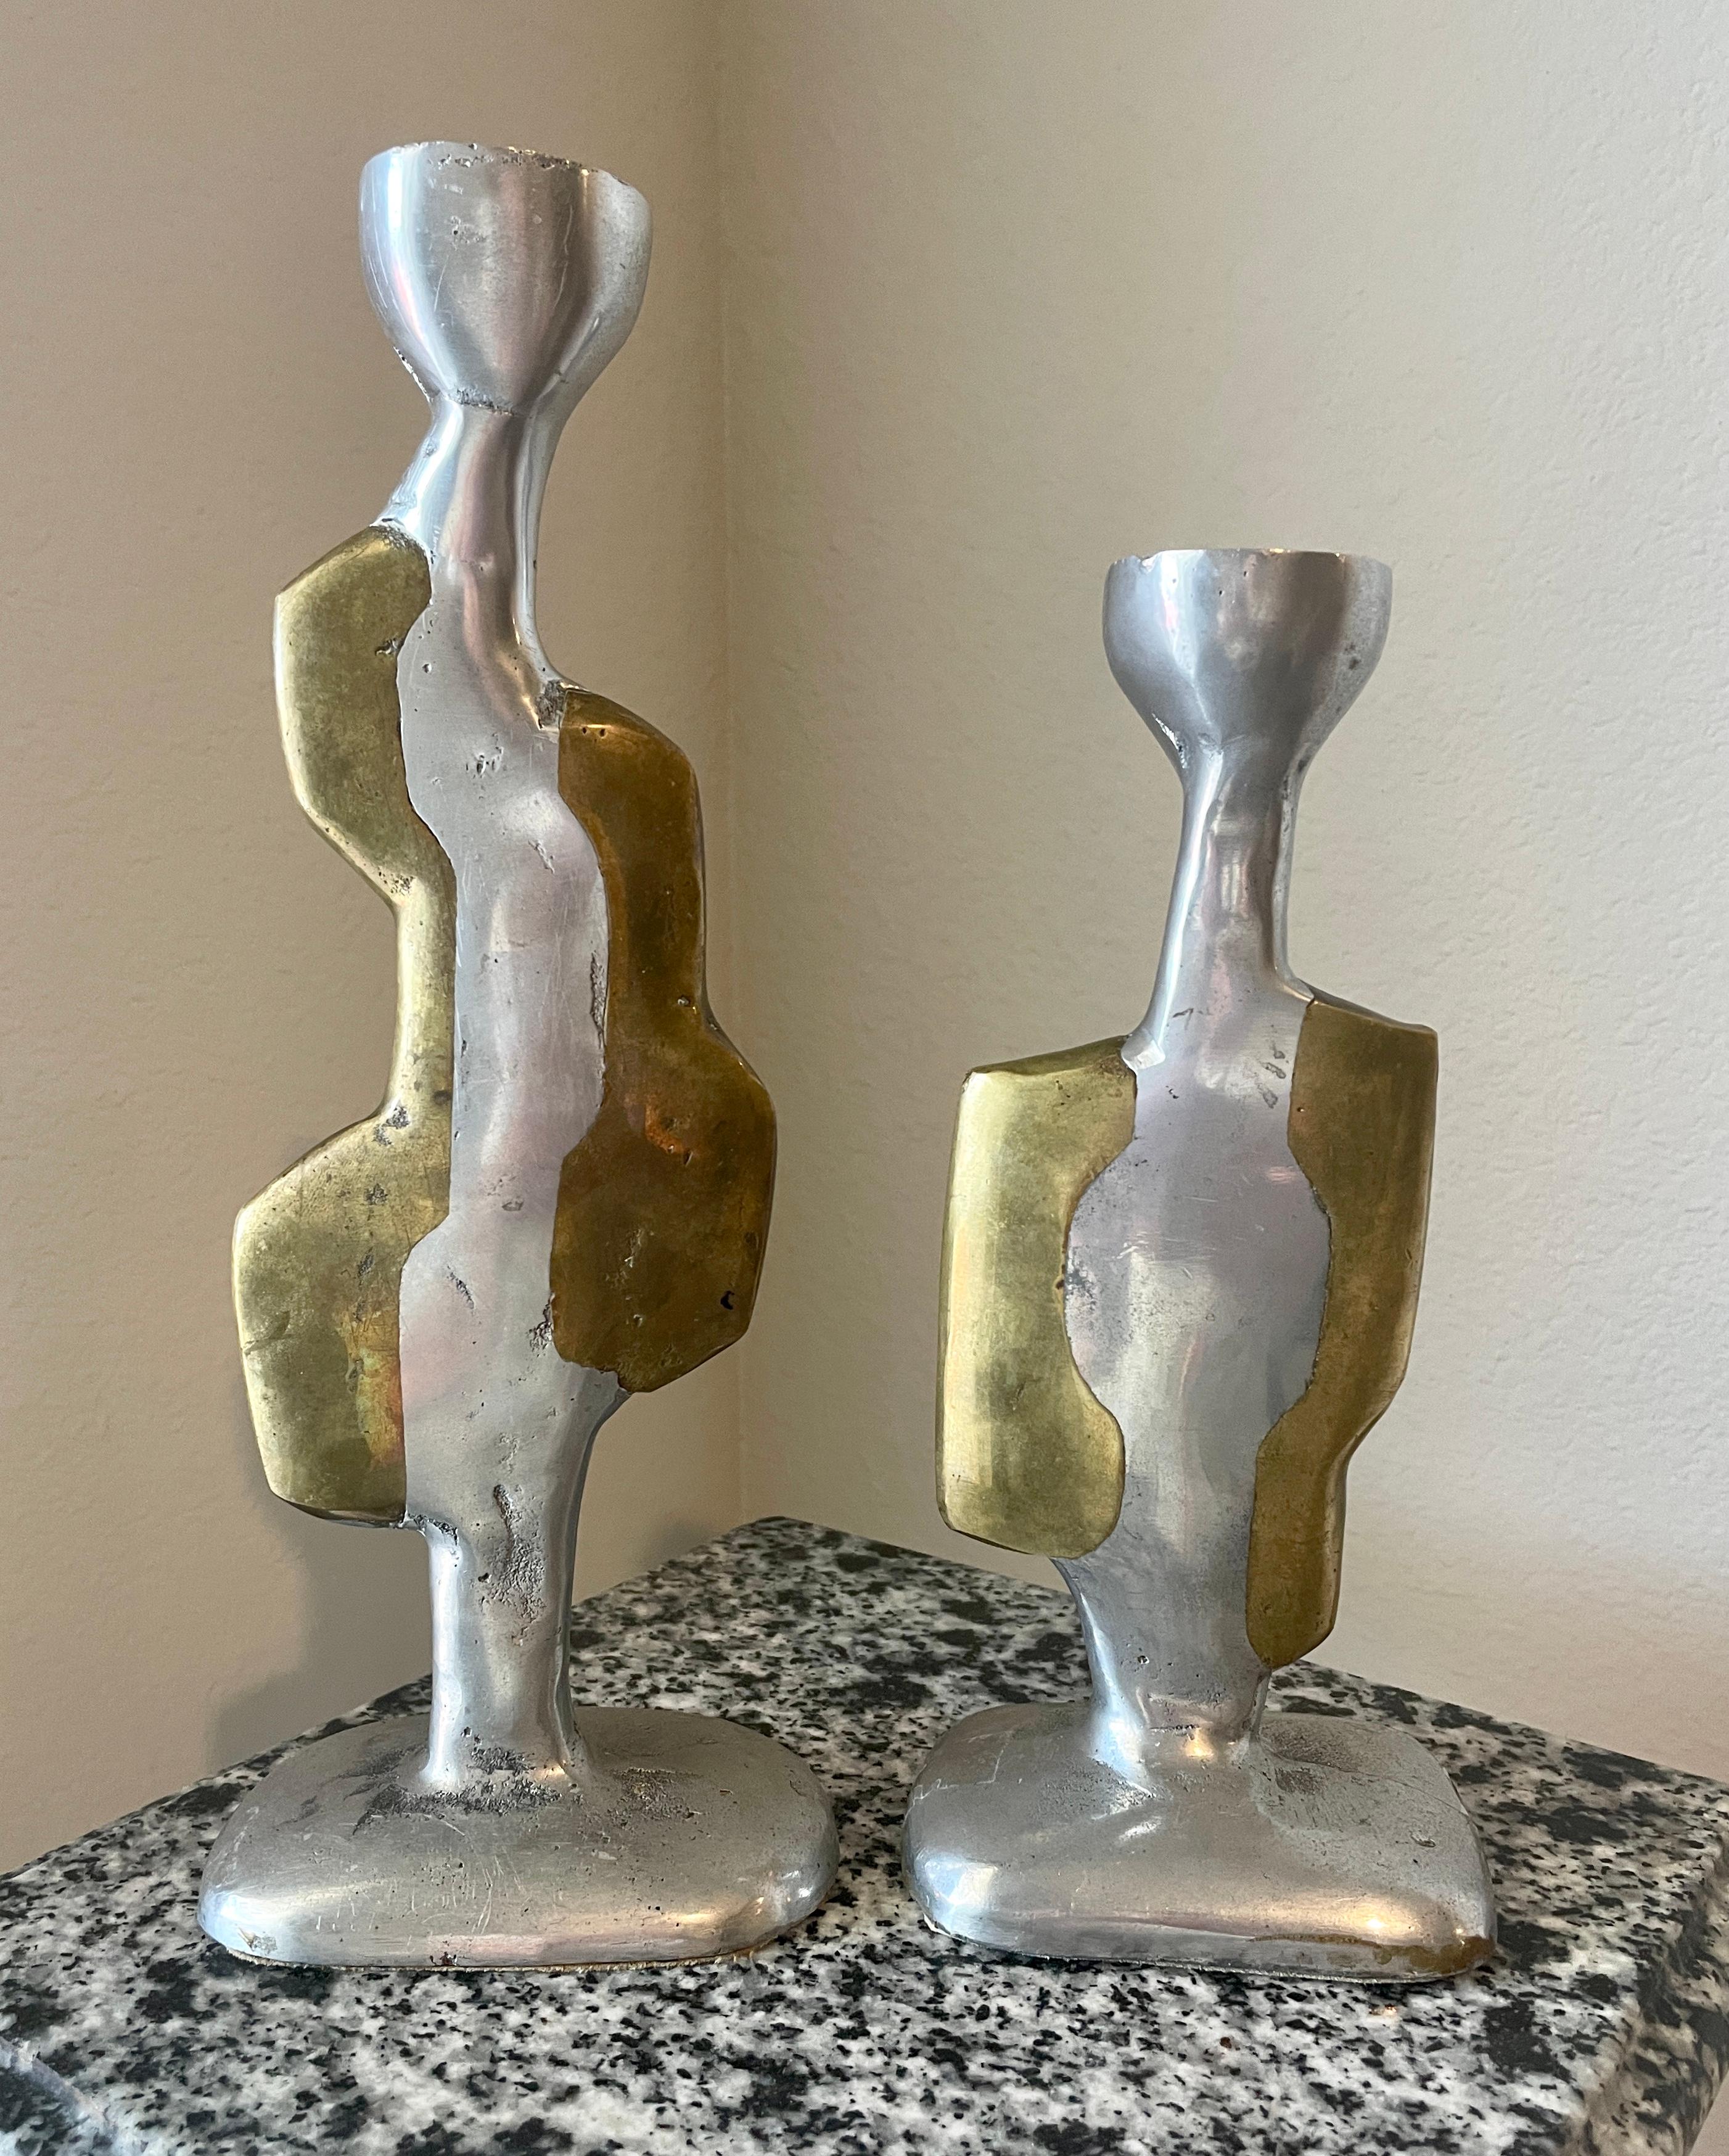 David Marshall Abstract Brutalist candle sticks- A pair. These have a nice patina on then consistent with age 
Taller Candlestick: 10.75 H x 4 W x 2.75 D
Shorter Candlestick: 8H x 4 W x 3D.